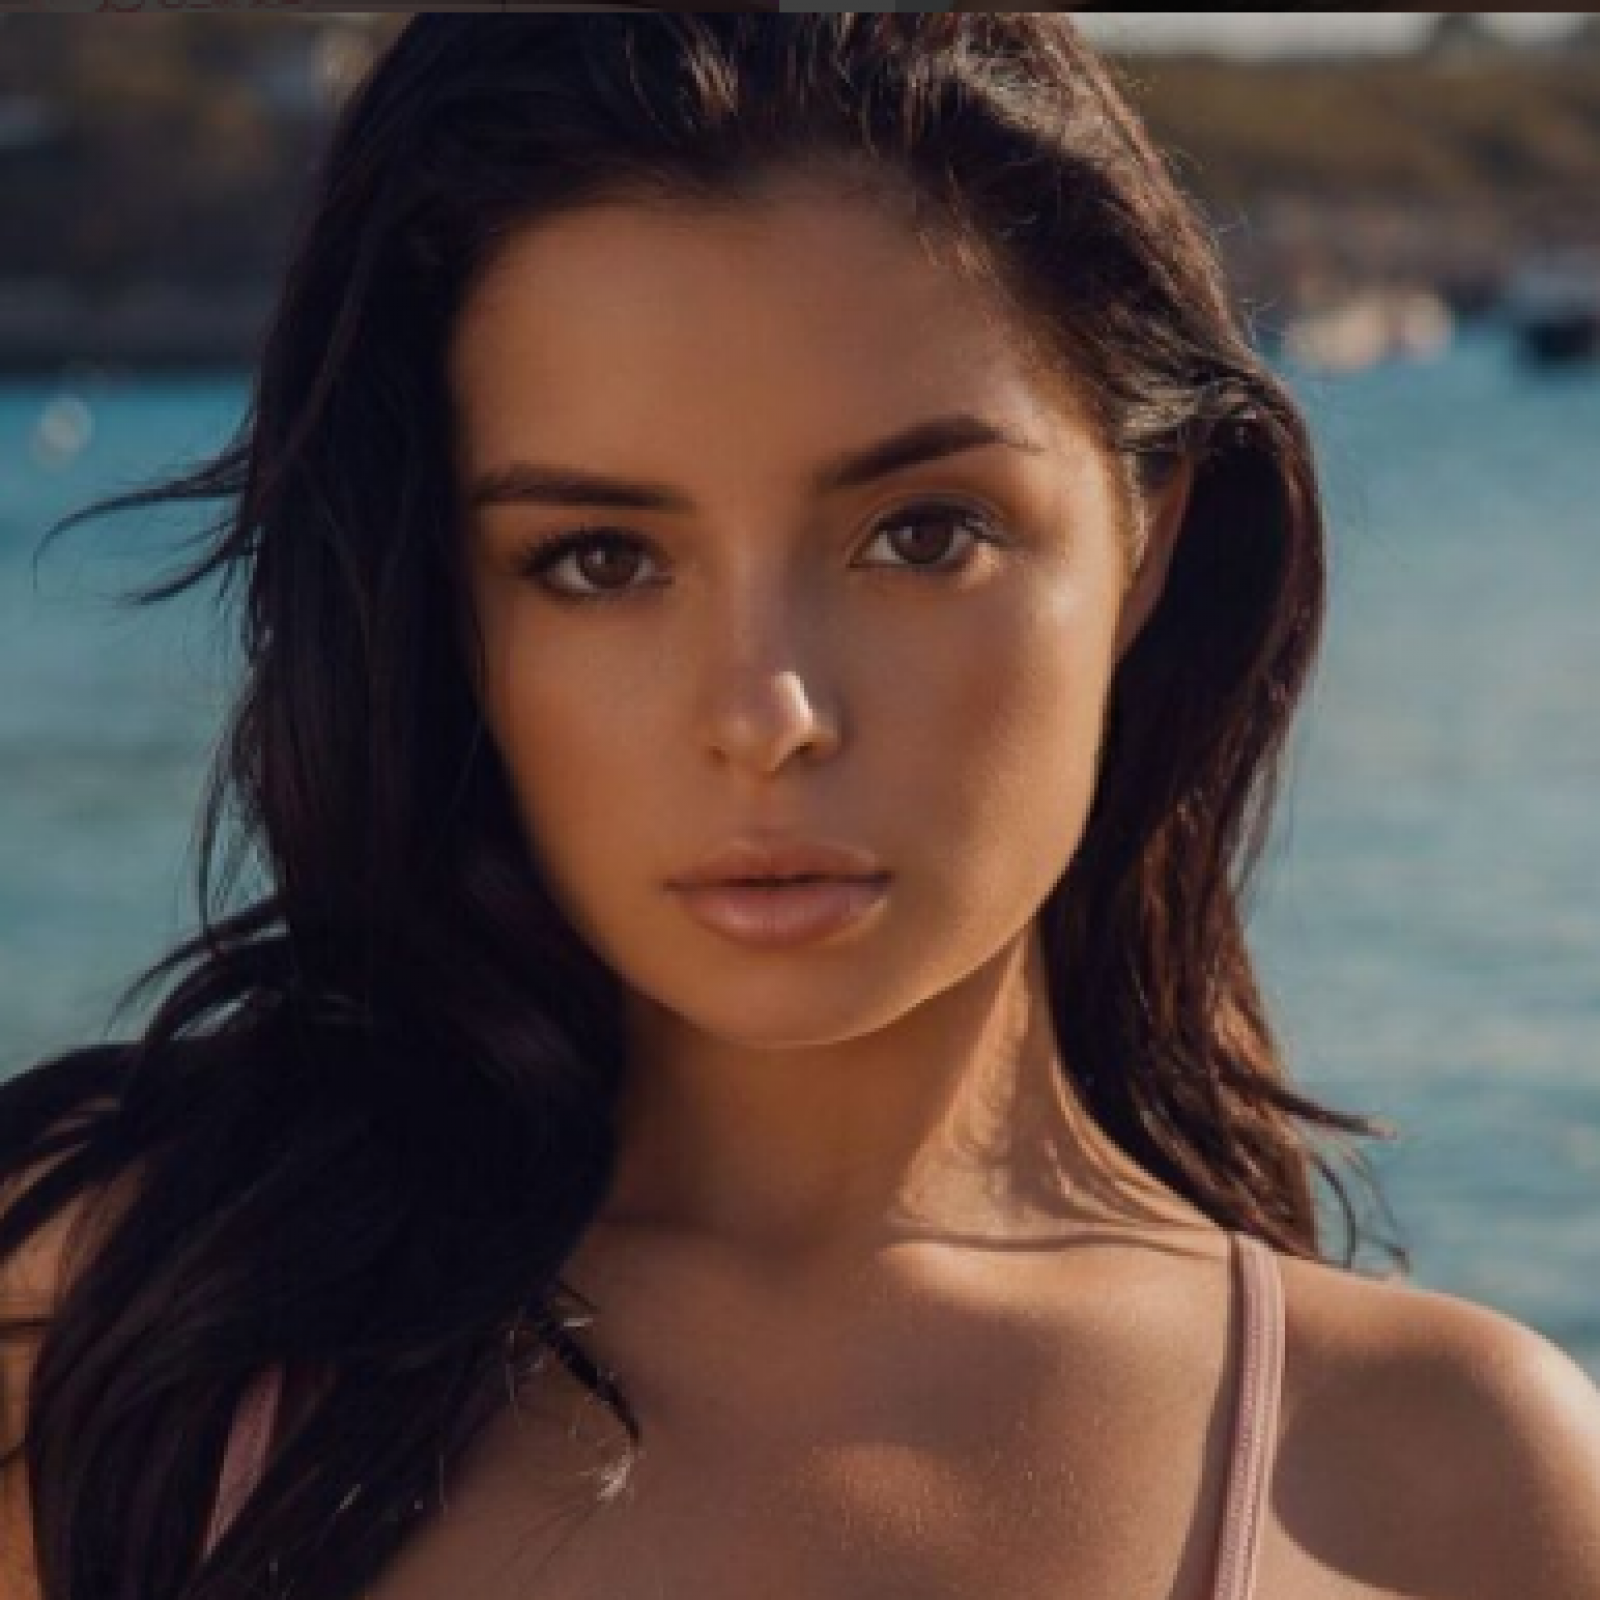 Amazingly gorgeous body': Demi Rose poses in a tiny bikini and